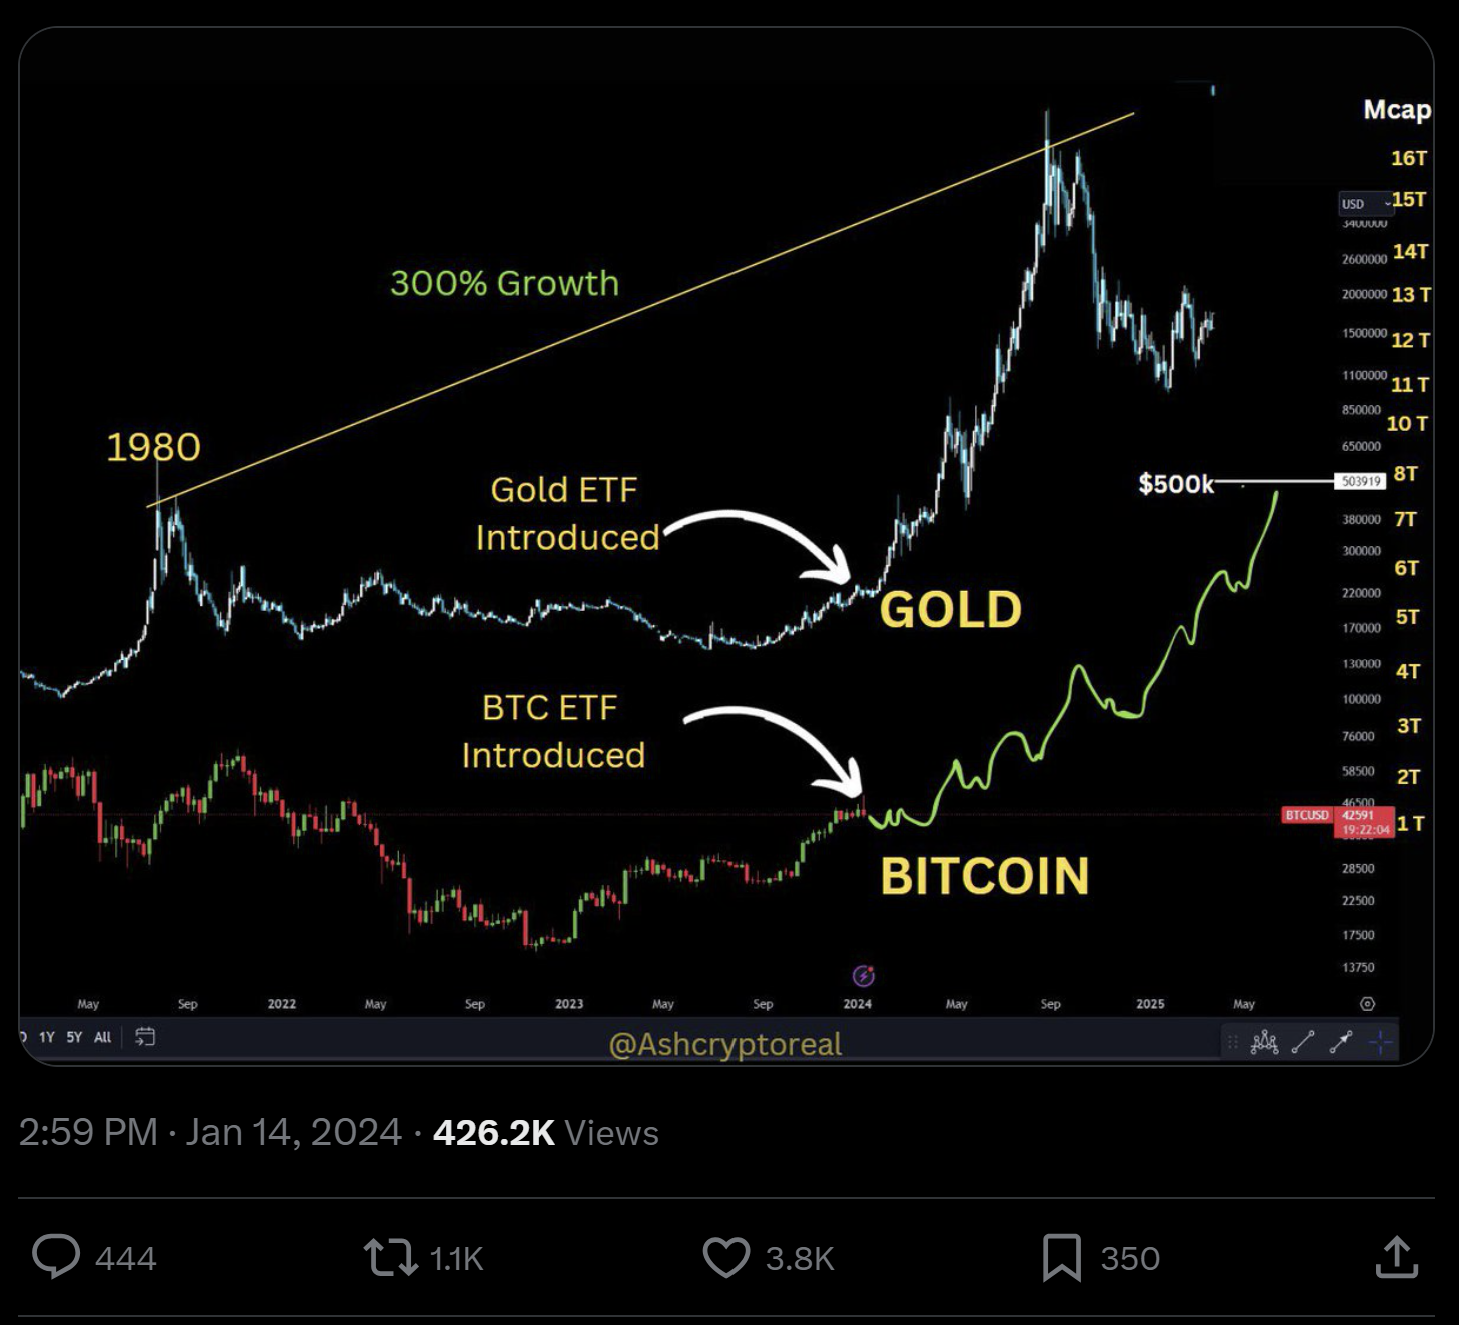 Ash Crypto's tweet outlines a bullish long-term forecast for Bitcoin, drawing parallels with gold's market cap expansion post-ETF.